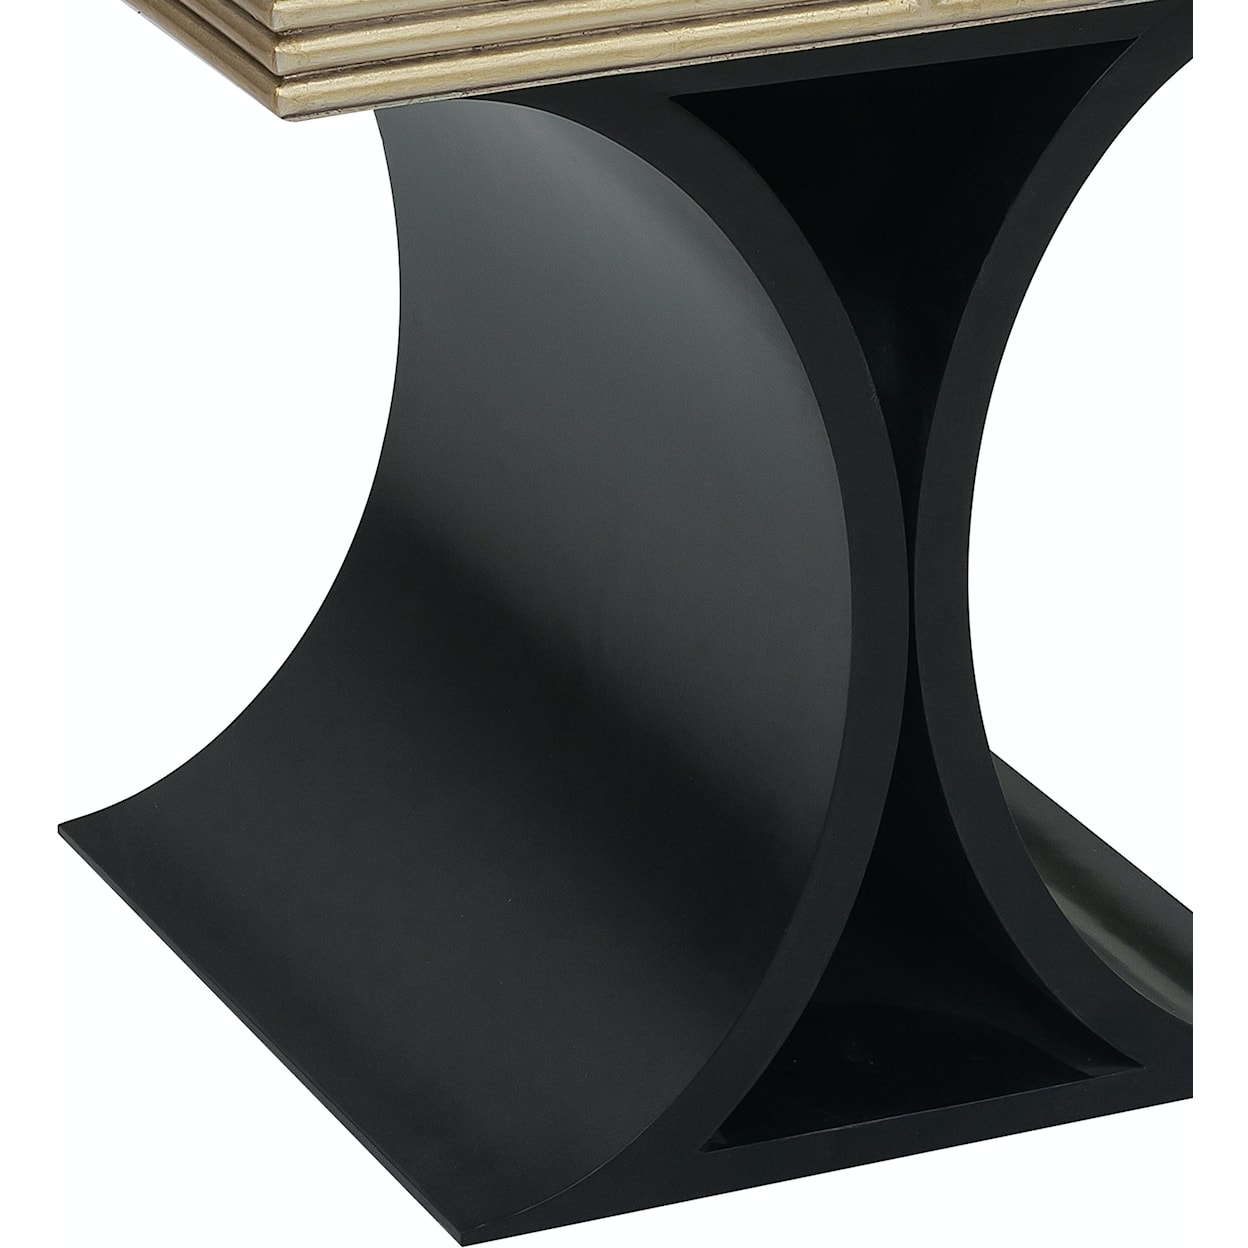 Pulaski Furniture Accents July 2021 End Table